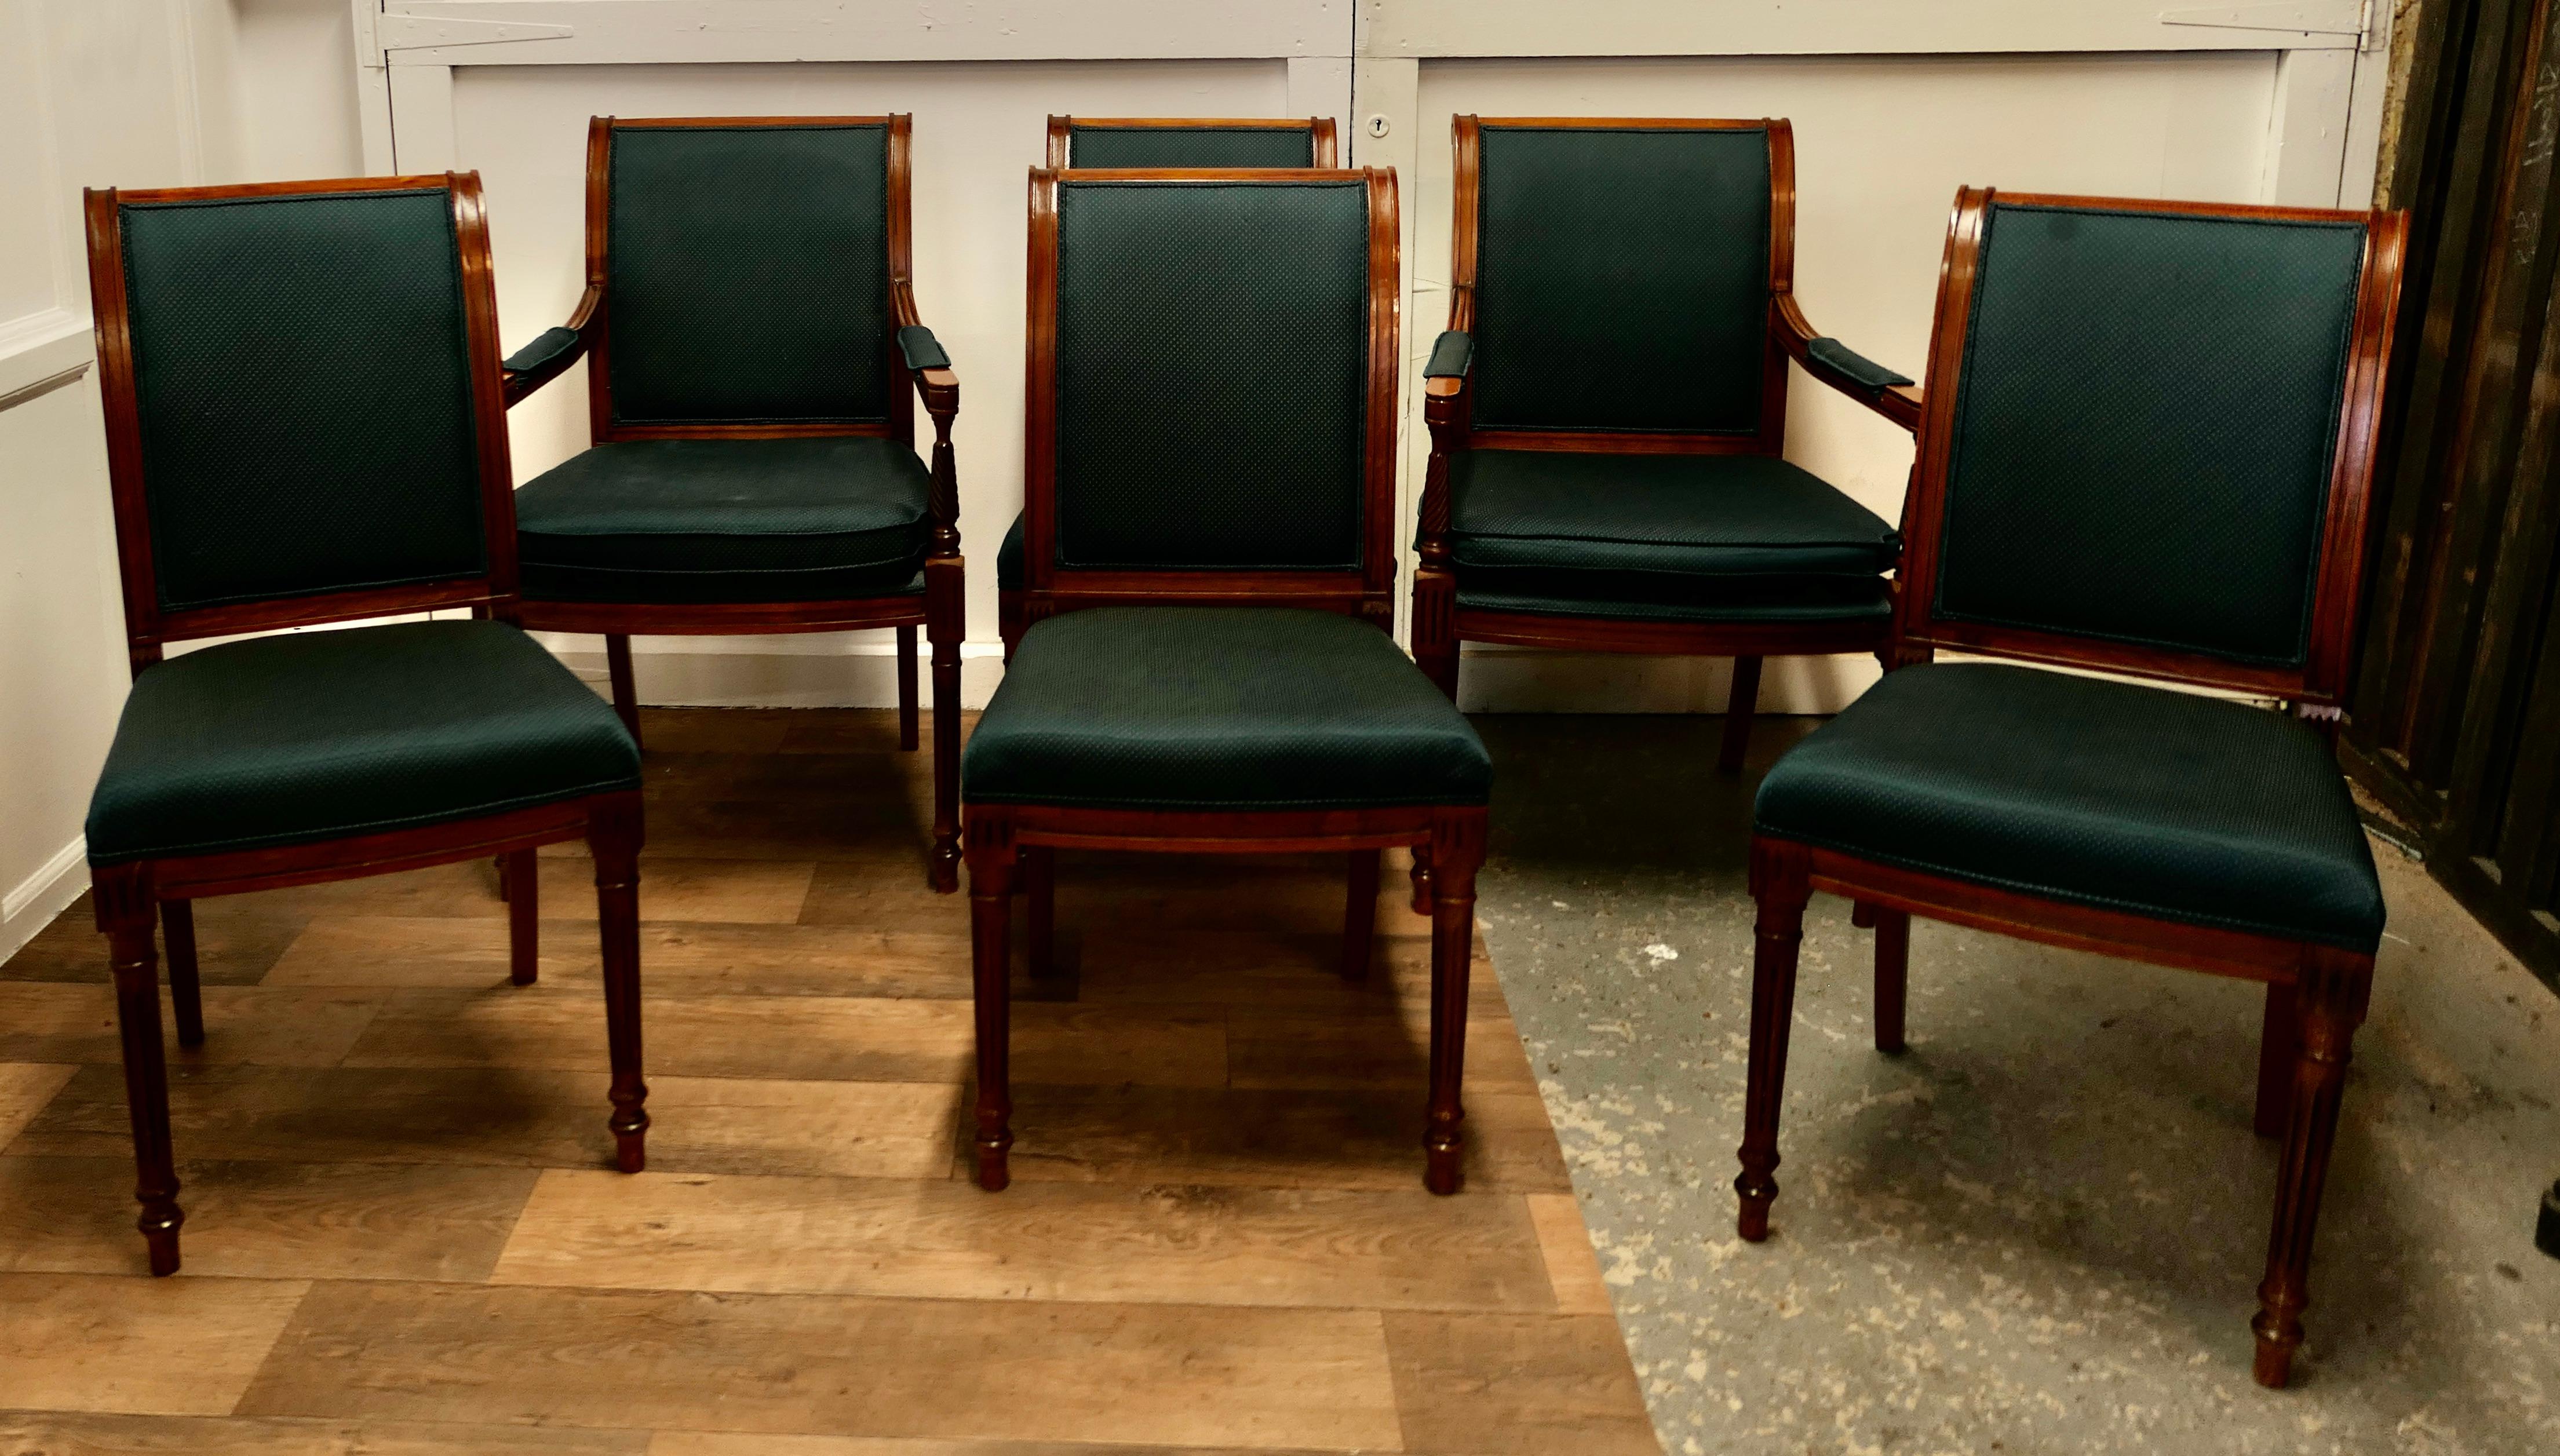 Set of 6 midcentury Teak Dining Chairs in the Regency Style

A Good Quality set of midcentury Teak Dining Chairs, including 2 carver chairs with removable cushions, the chairs have stout turned and reeded legs they are very solid and sound. The